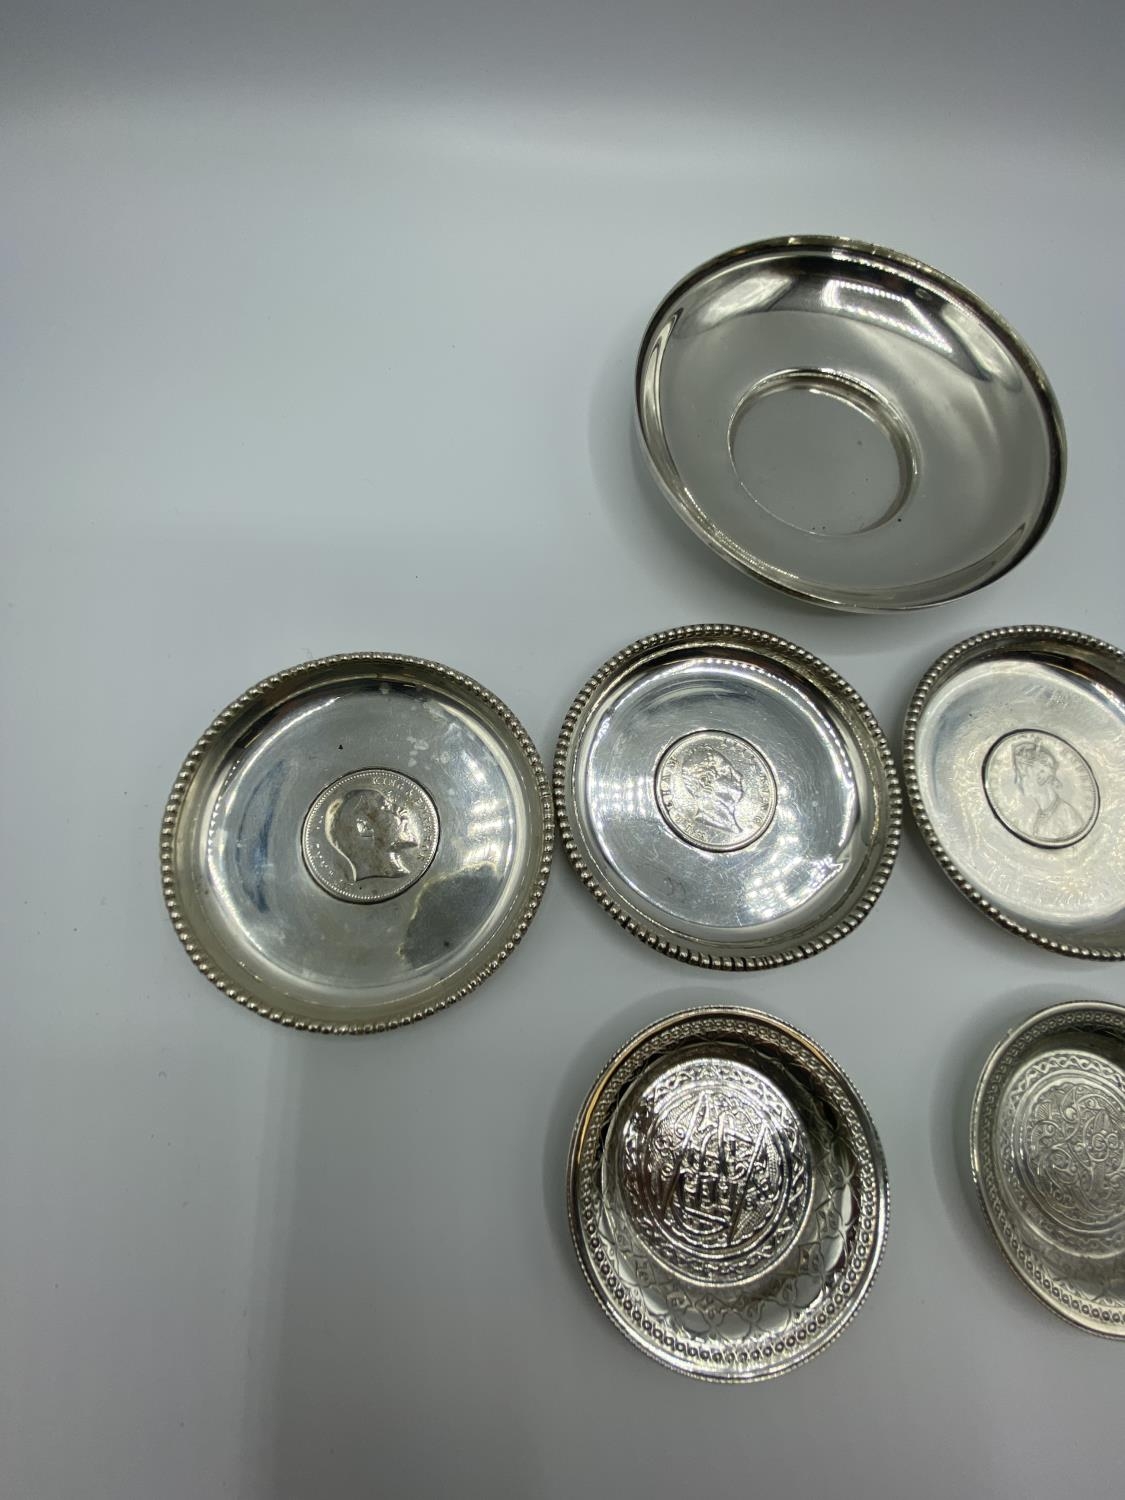 A set of 4 silver coin set pin dishes and a sterling silver example and 2 unmarked white metal - Image 2 of 10